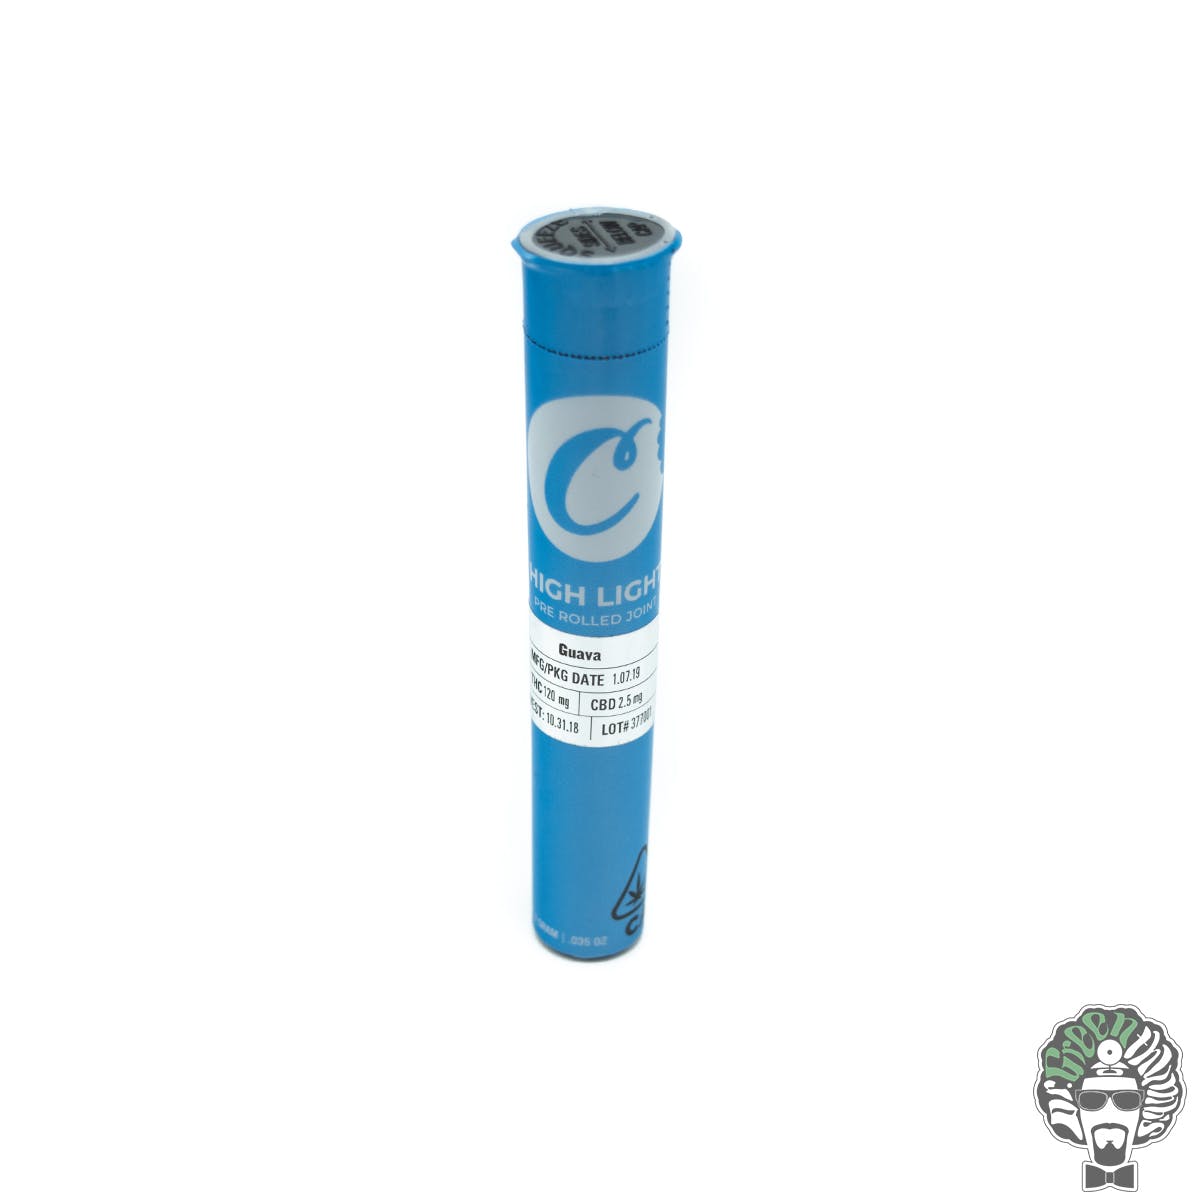 Guava Highlight Single Pre-Roll By Cookies